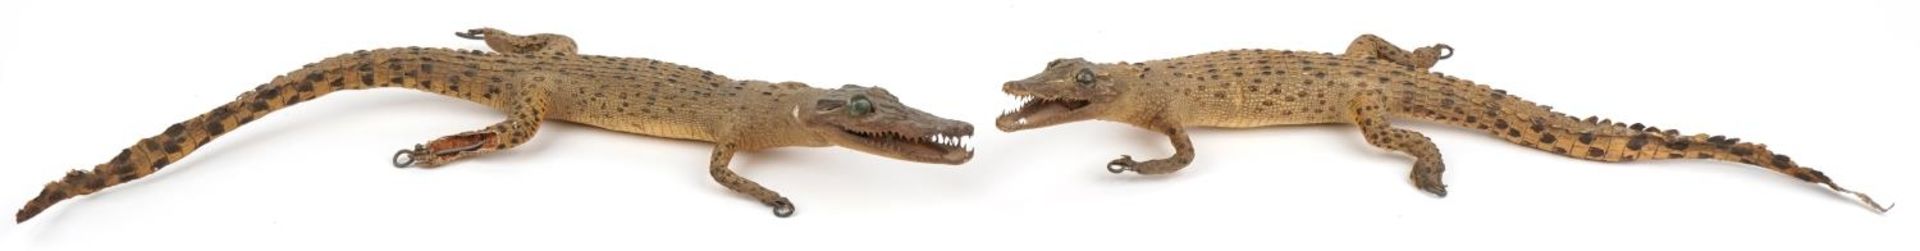 Two taxidermy interest baby crocodiles, each approximately 60cm in length : For further